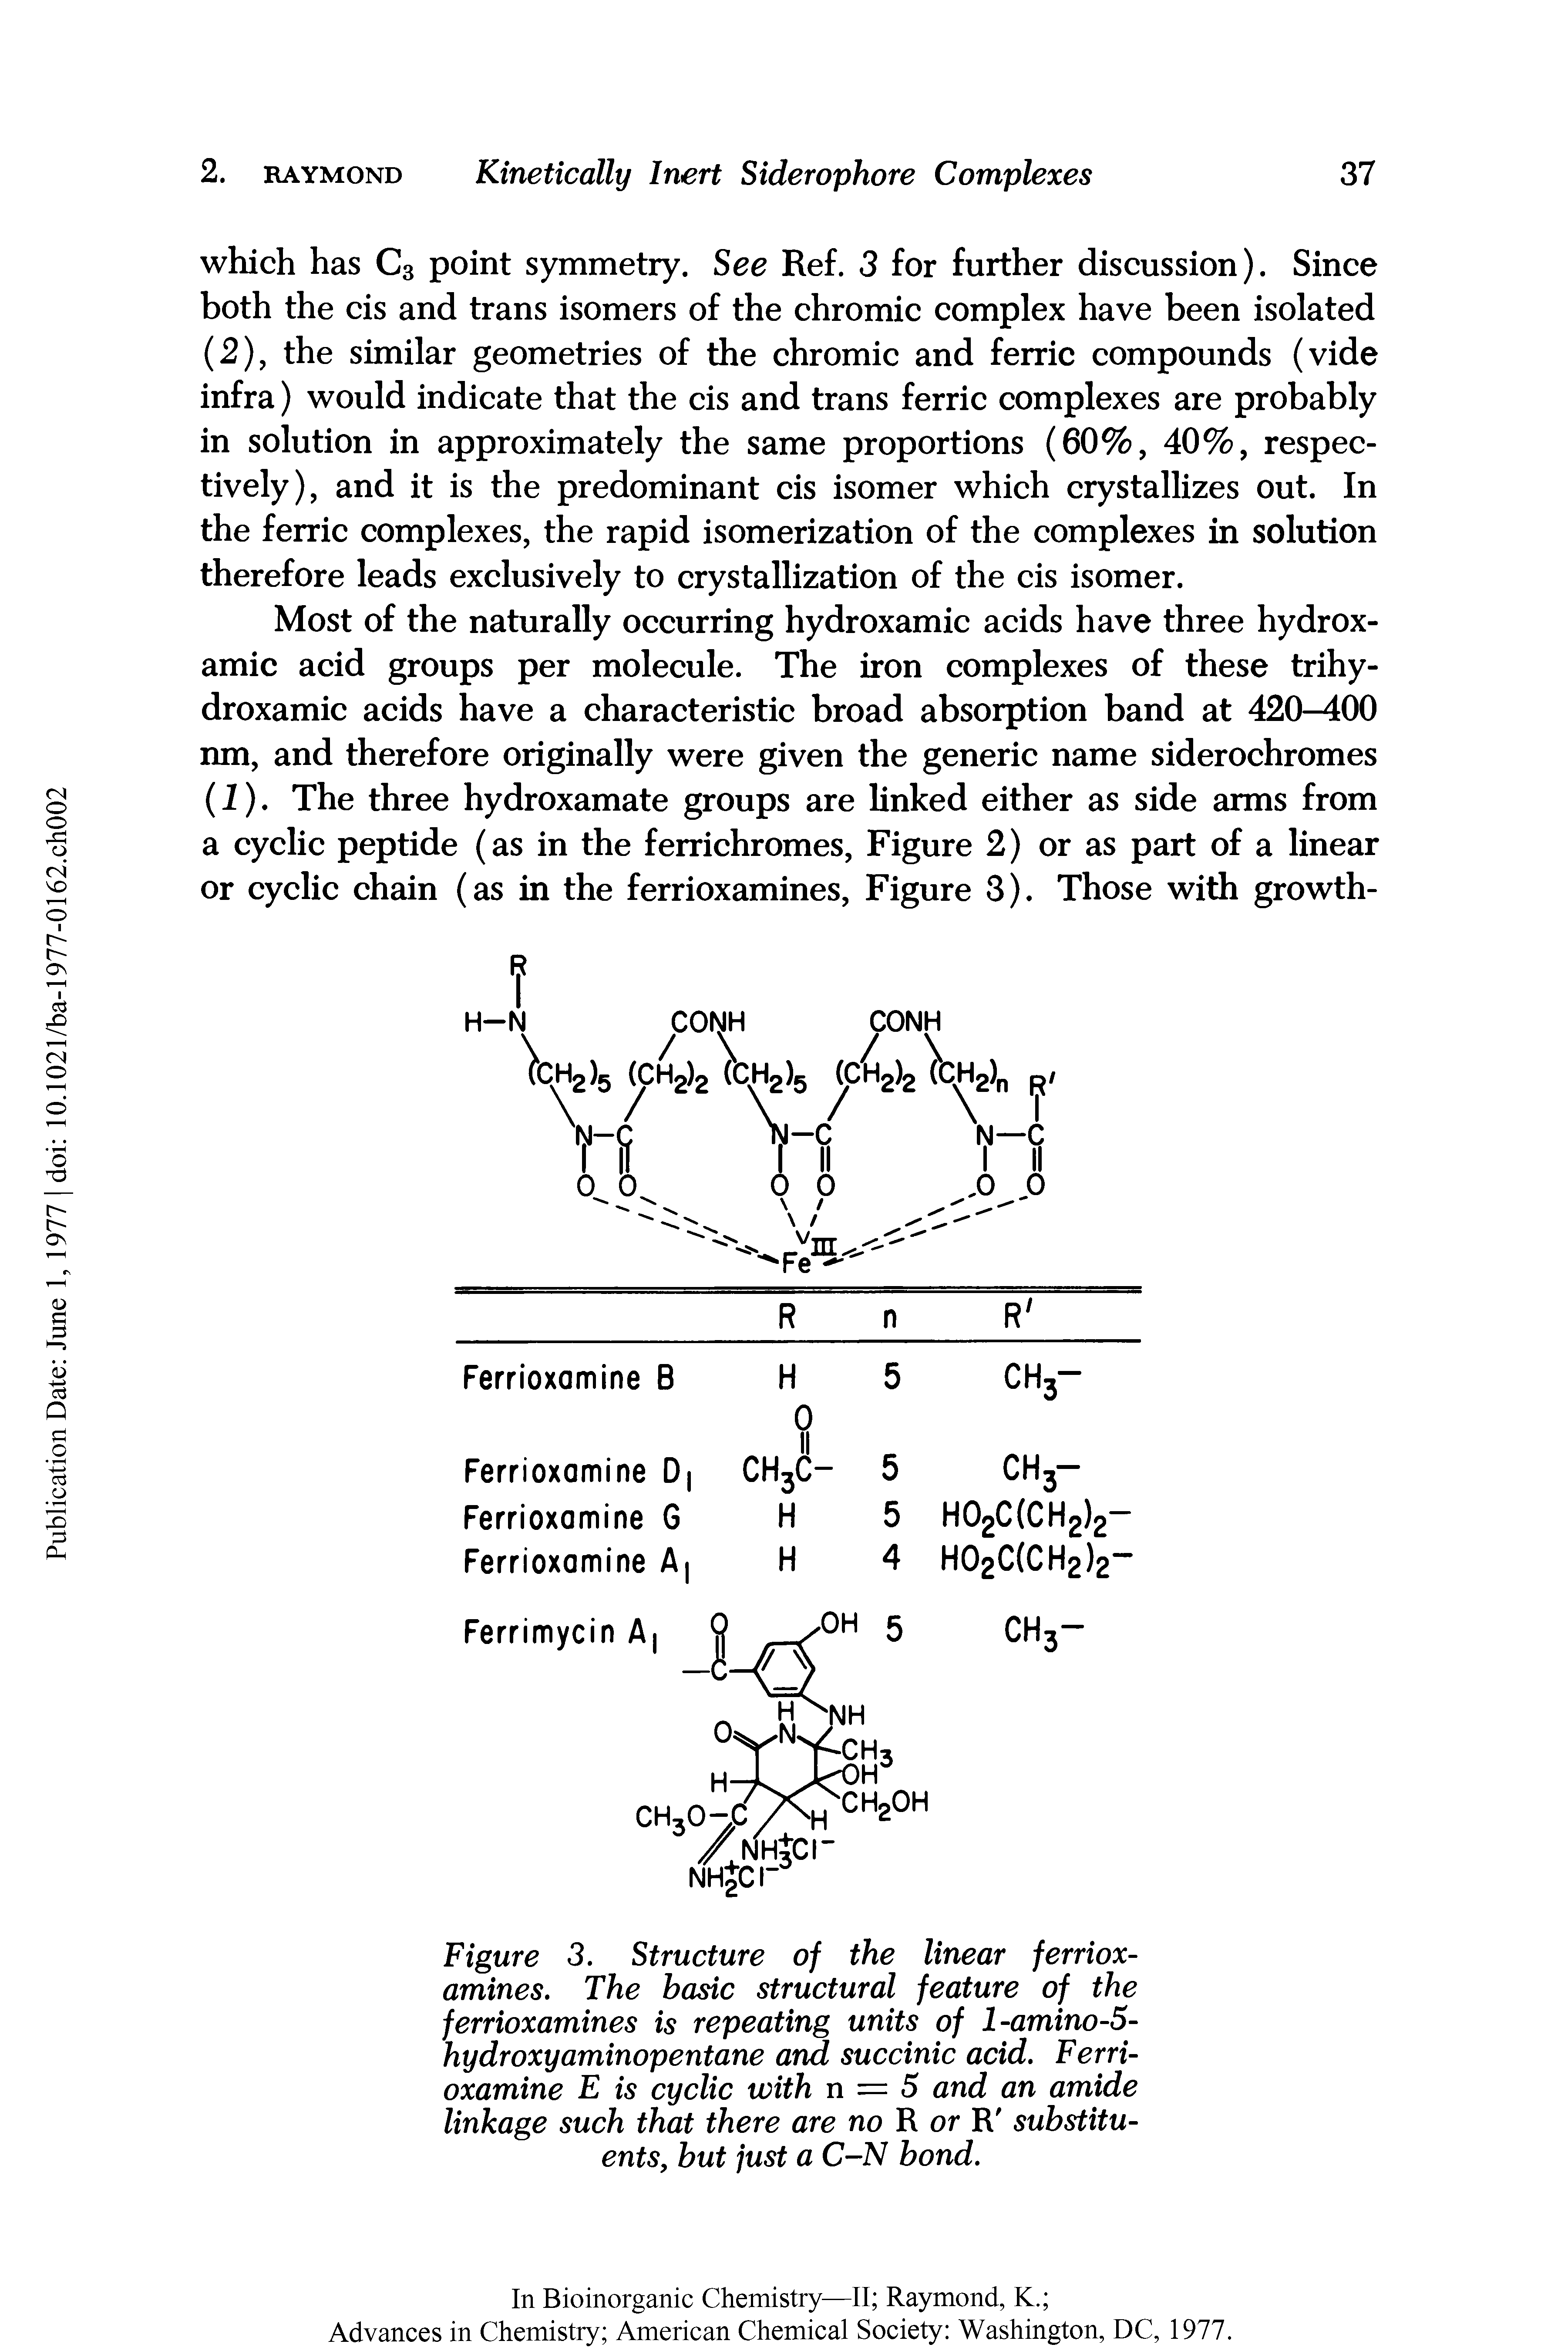 Figure 3. Structure of the linear ferrioxamines. The basic structural feature of the ferrioxamines is repeating units of l-amino-5-hydroxyaminopentane and succinic acid. Ferrioxamine E is cyclic with n = 5 and an amide linkage such that there are no R or R substituents, but just a C-N bond.